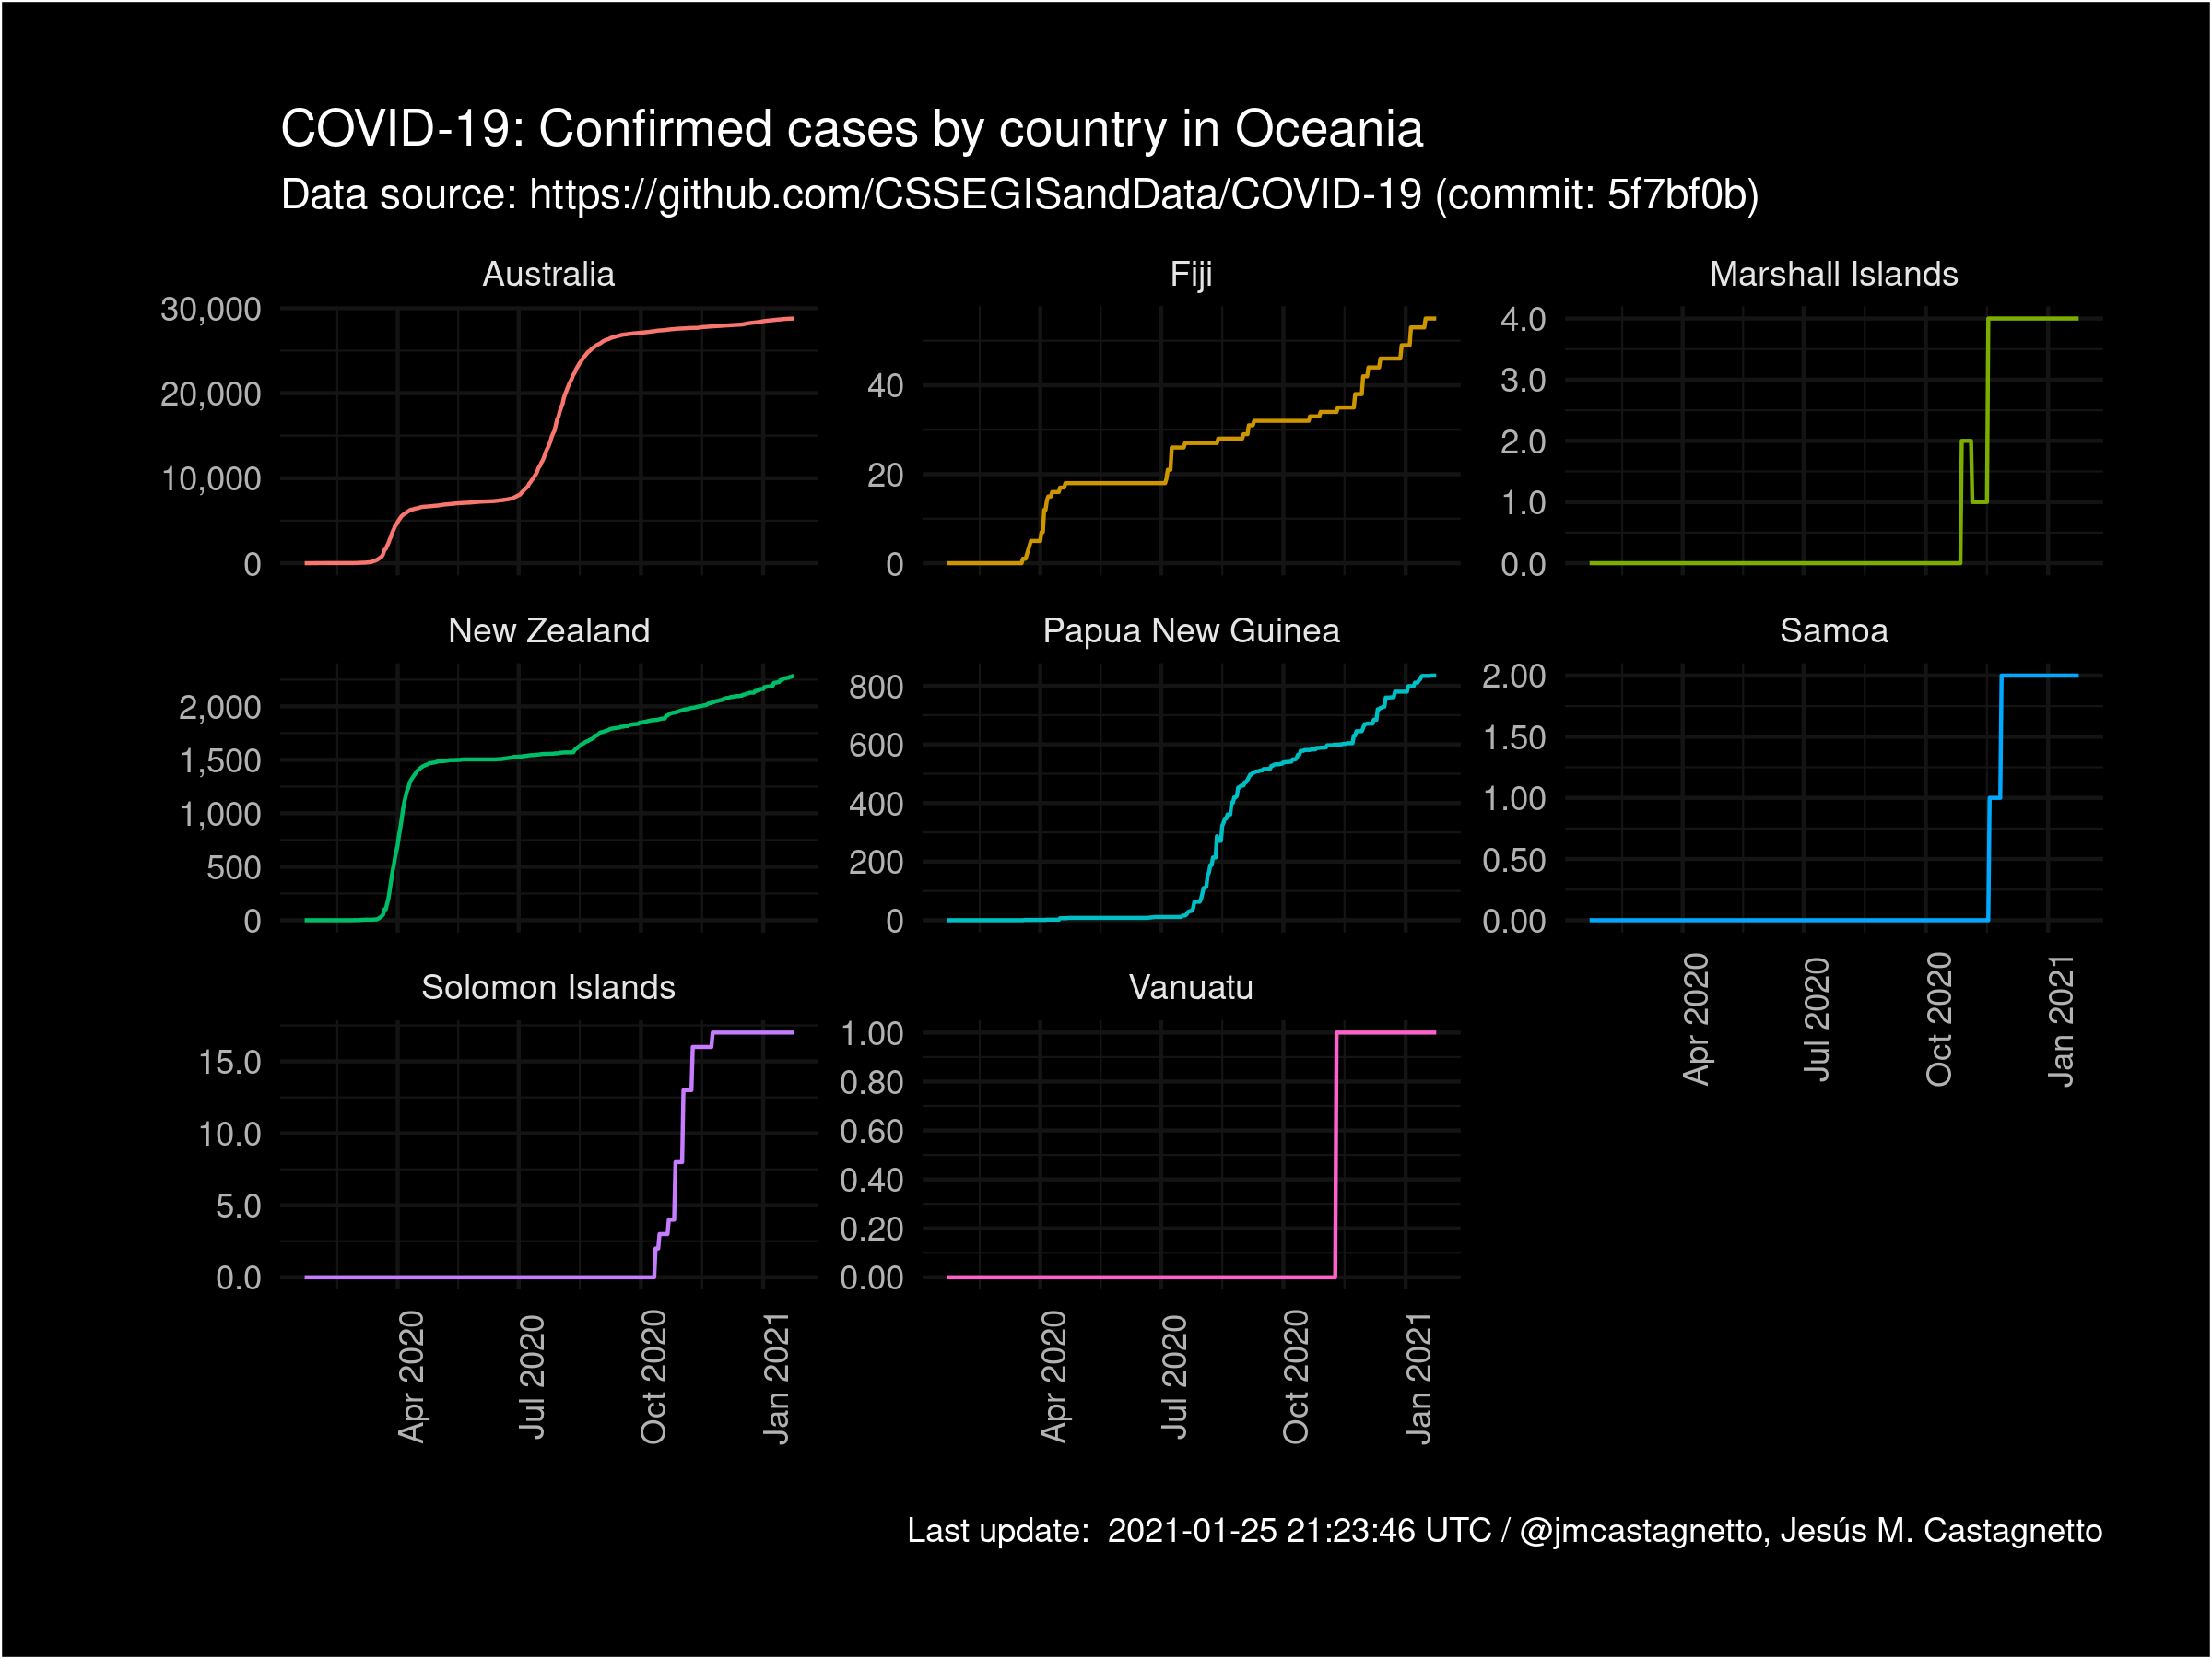 COVID-19 Confirmed cases by country (Oceania)